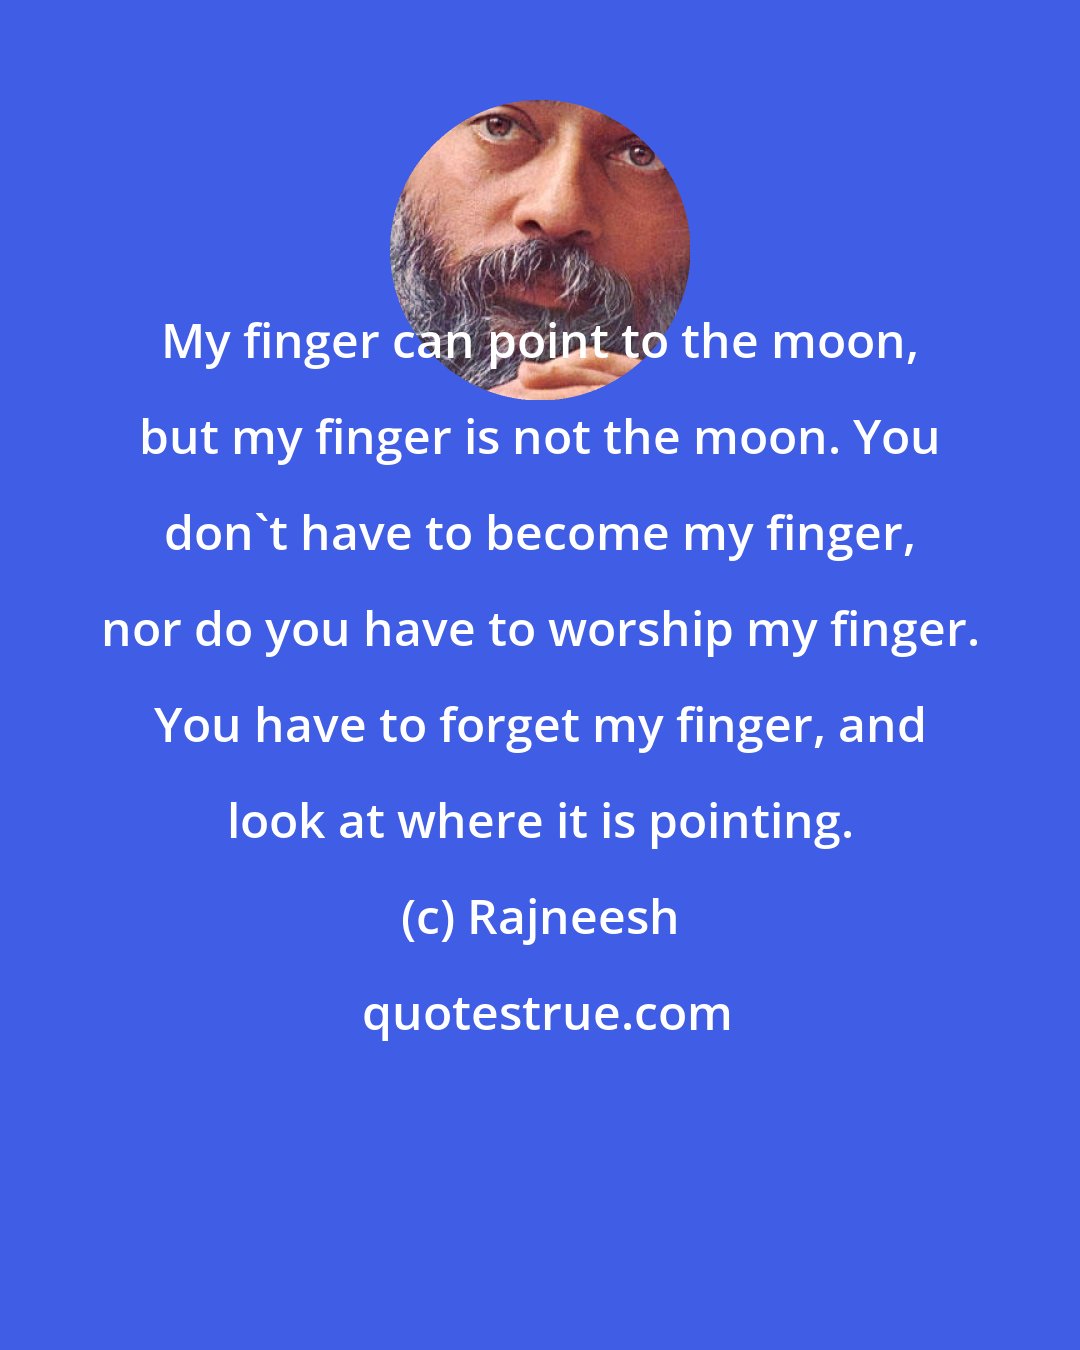 Rajneesh: My finger can point to the moon, but my finger is not the moon. You don't have to become my finger, nor do you have to worship my finger. You have to forget my finger, and look at where it is pointing.